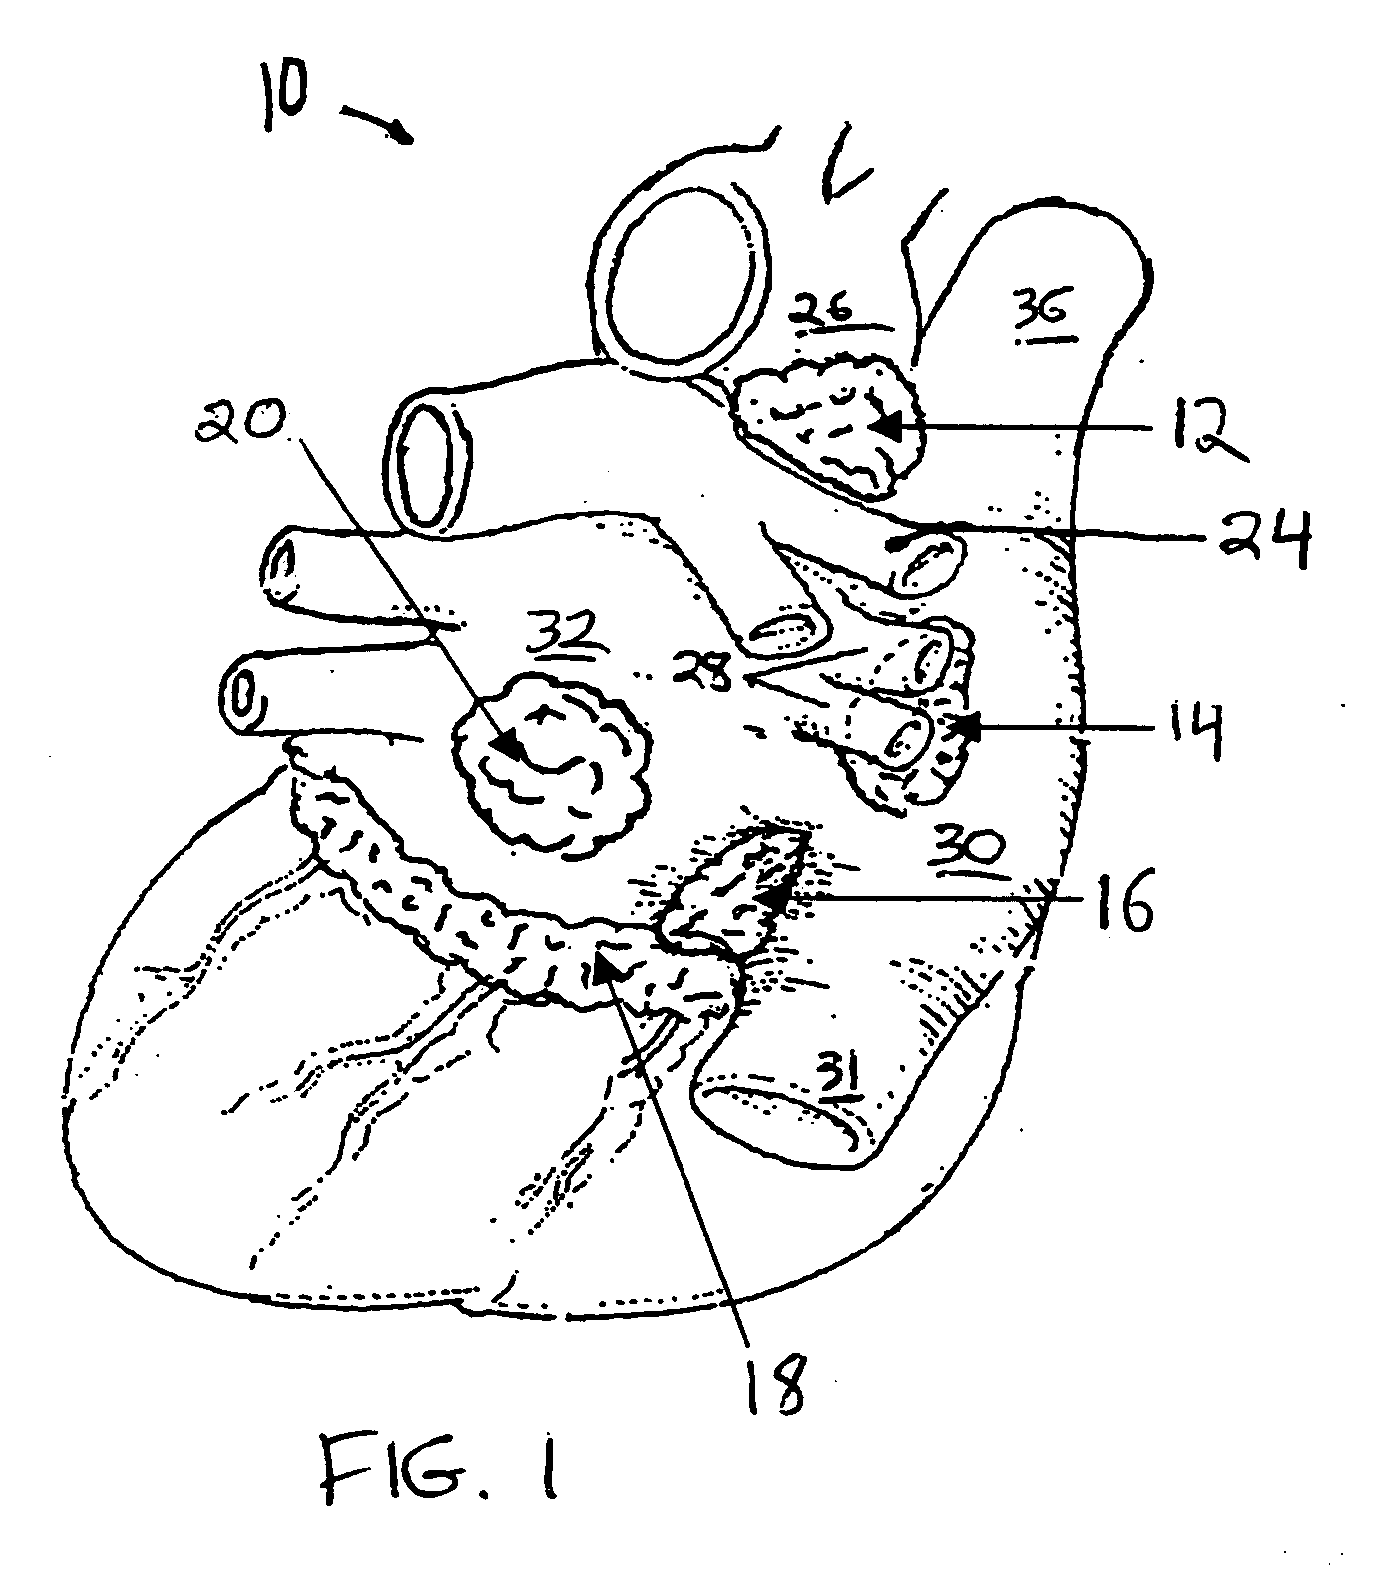 Systems and methods for selective denervation of heart dysrhythmias